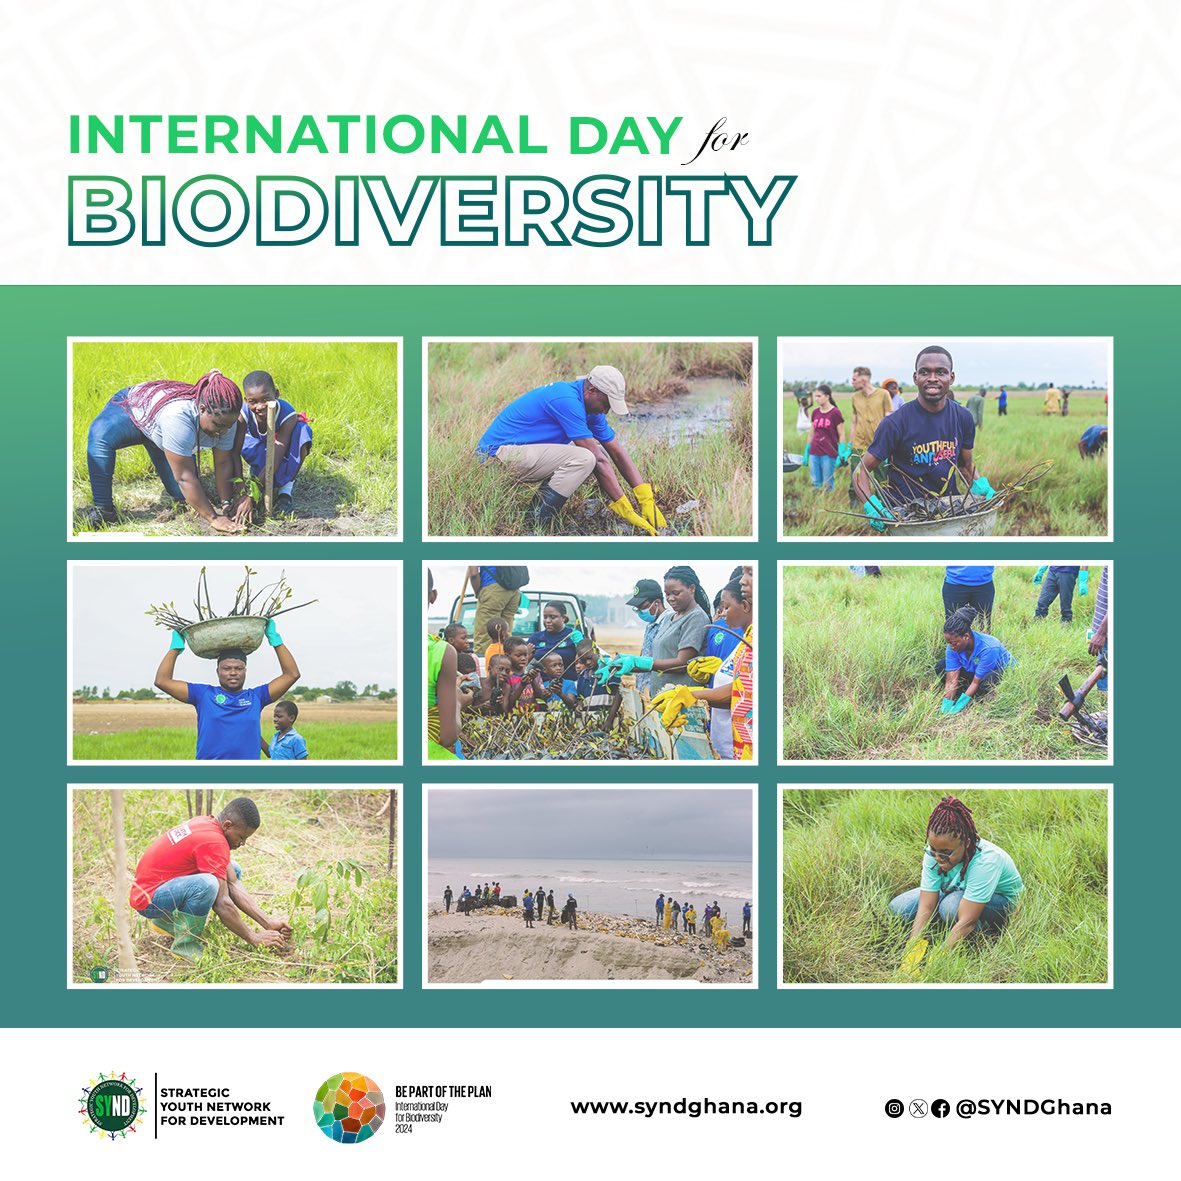 🌍 Celebrating International Day for Biodiversity! 🌿 At SYND, we're #PartOfThePlan! Our Mangrove Restoration in Ada, Forest Restoration in Agogo, and Beach Cleanups show our commitment to protecting biodiversity. Join us in making a difference! #BiodiversityDay #SYND